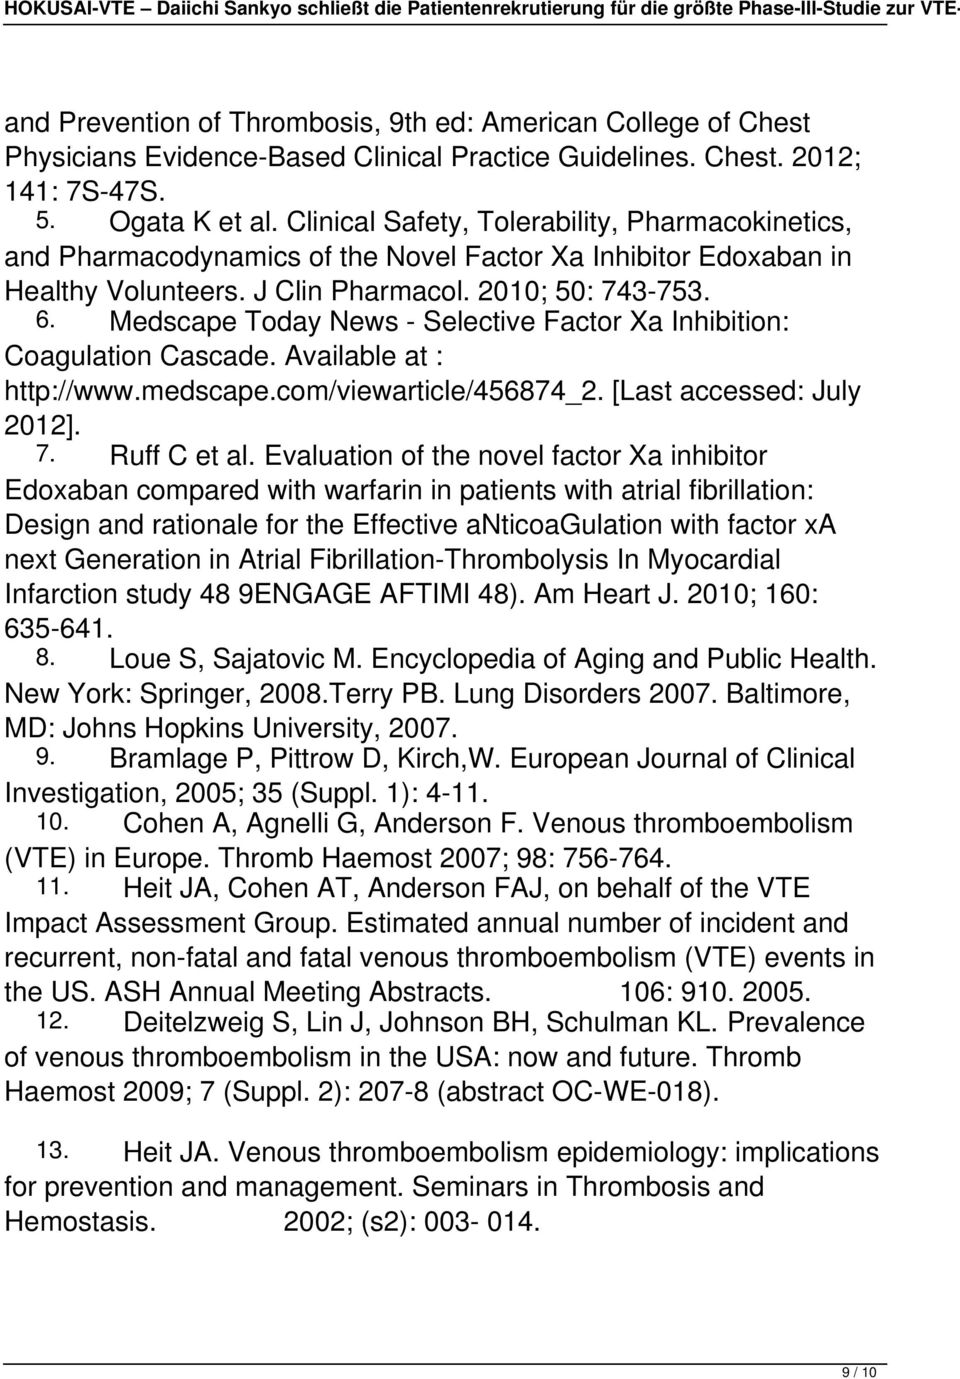 J Clin Pharmacol. 2010; 50: 743-753. 6. Medscape Today News - Selective Factor Xa Inhibition: Coagulation Cascade. Available at : http://www.medscape.com/viewarticle/456874_2.